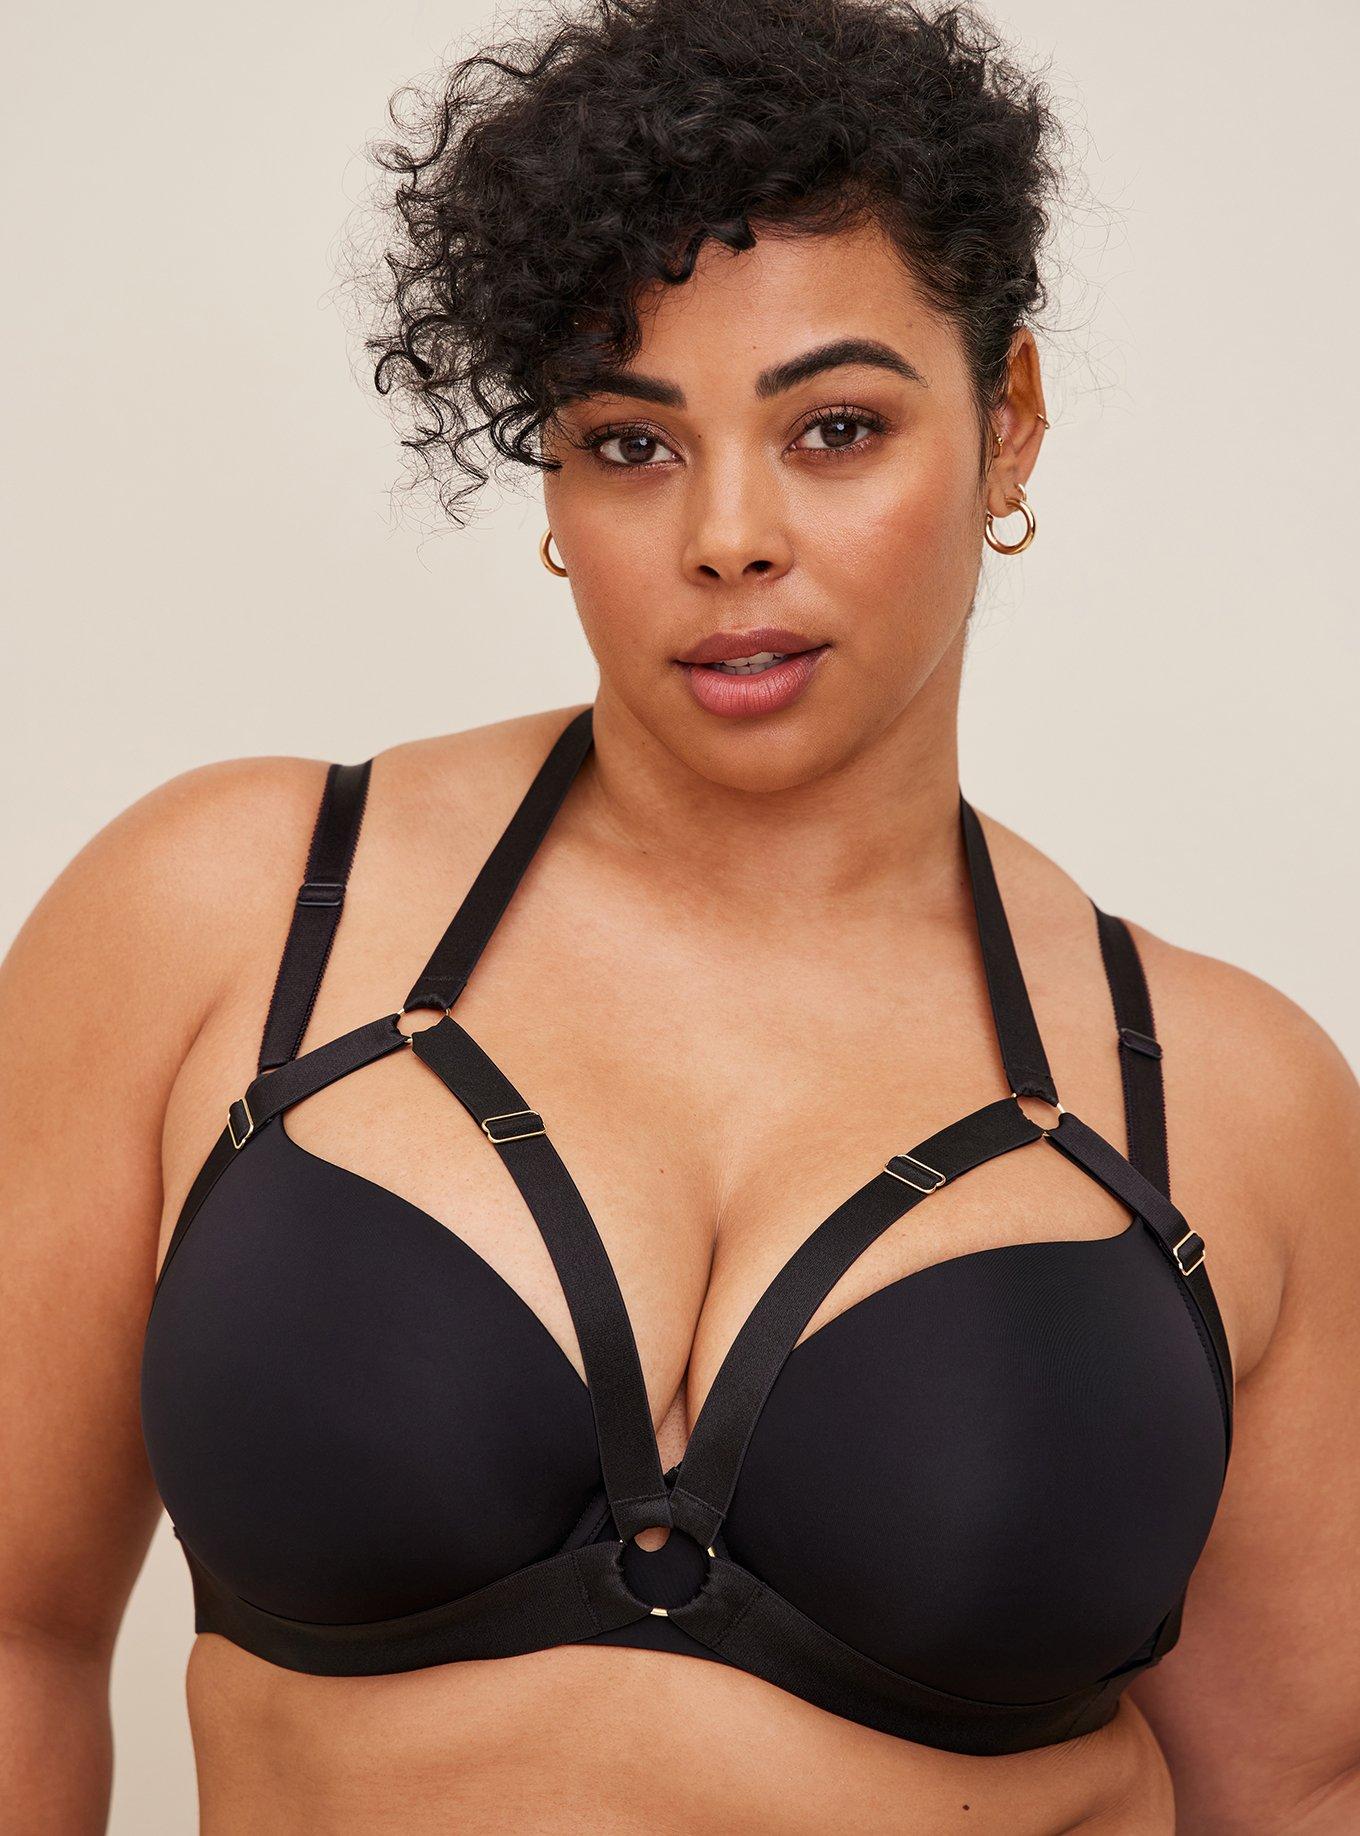 Lingerie firm Forplay hires plus-size models to show curvy girls